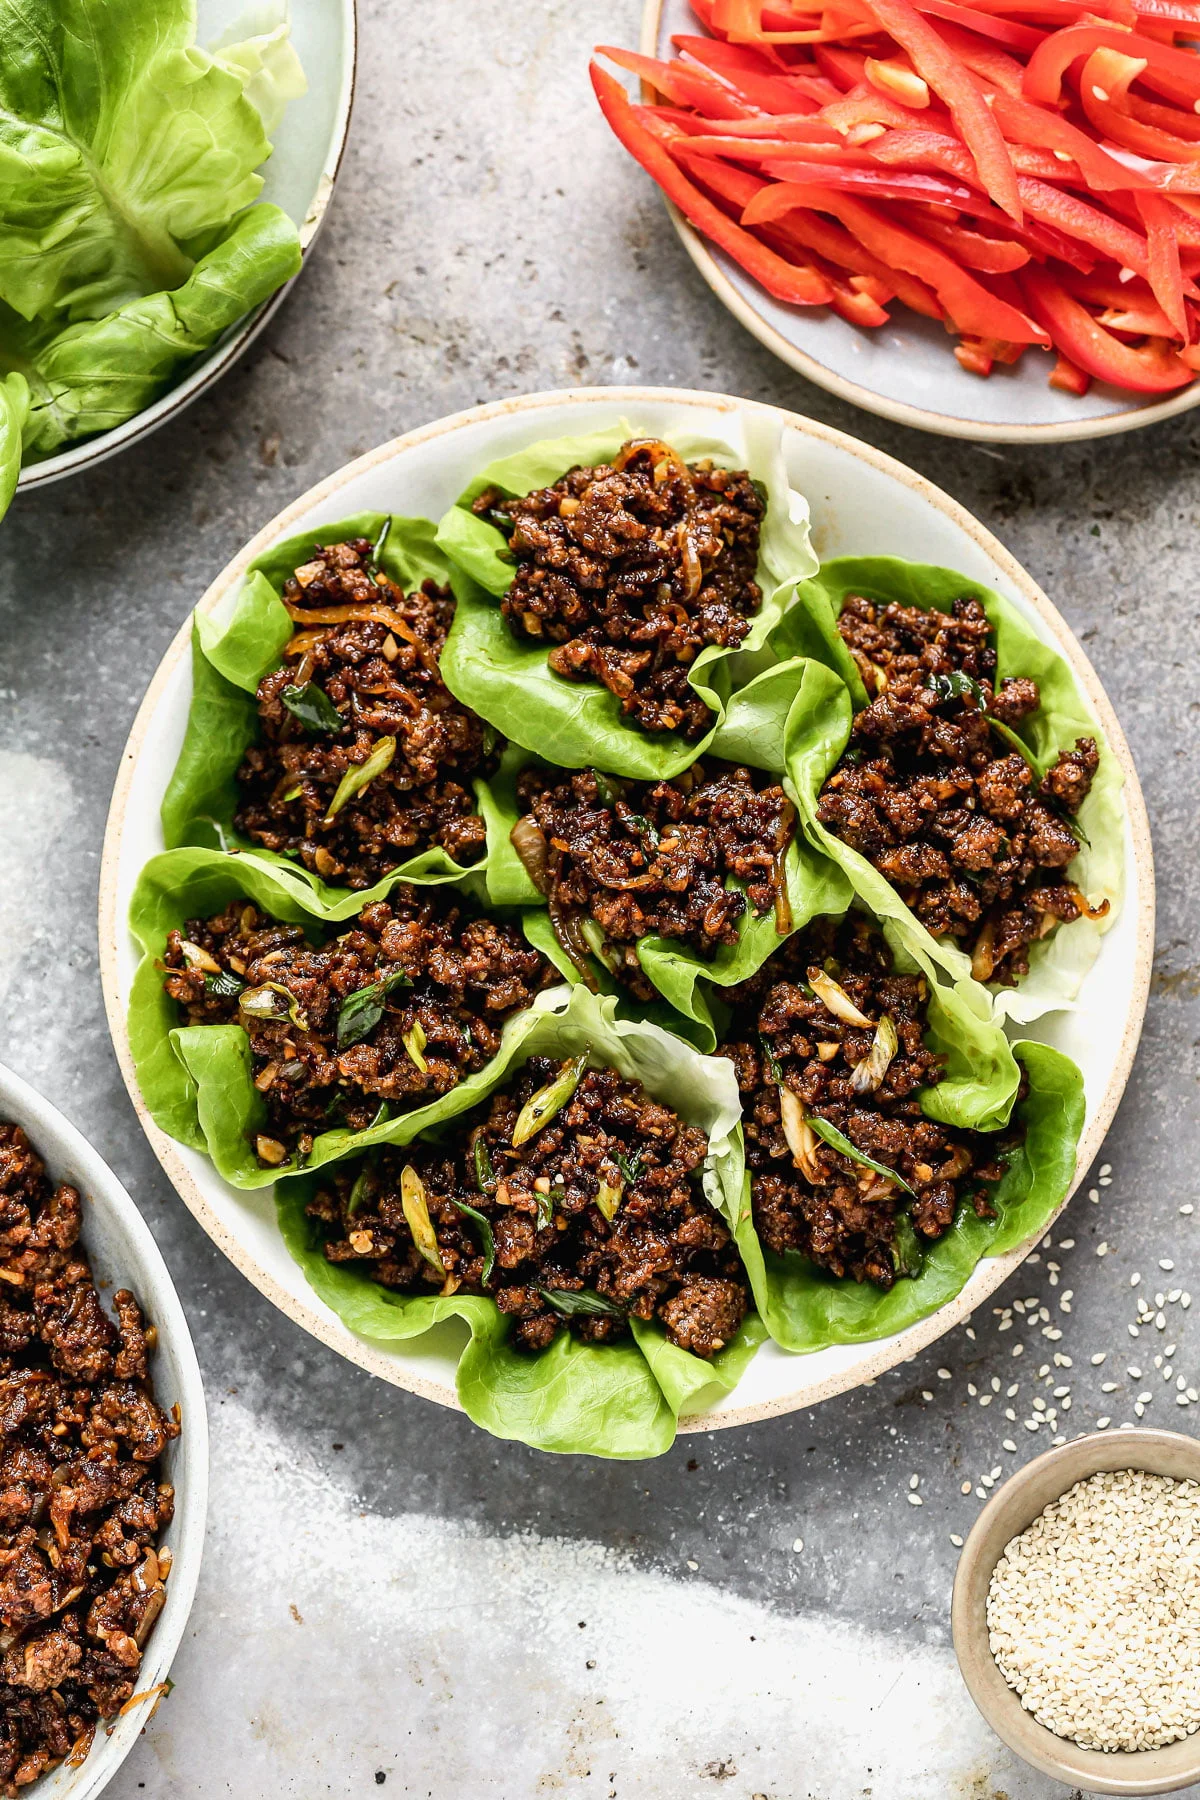 Ultra crispy and smothered in a soy-based sauce studded with rich brown sugar, sweet mirin wine, and brimming with heat from Sambal Oelek, these Beef Lettuce Wraps are my new favorite way to do lettuce. With easy-to-find ingredients, and minimal prep and cook time, they're also the perfect way to get dinner on the table without &nbsp;much effort.&nbsp;